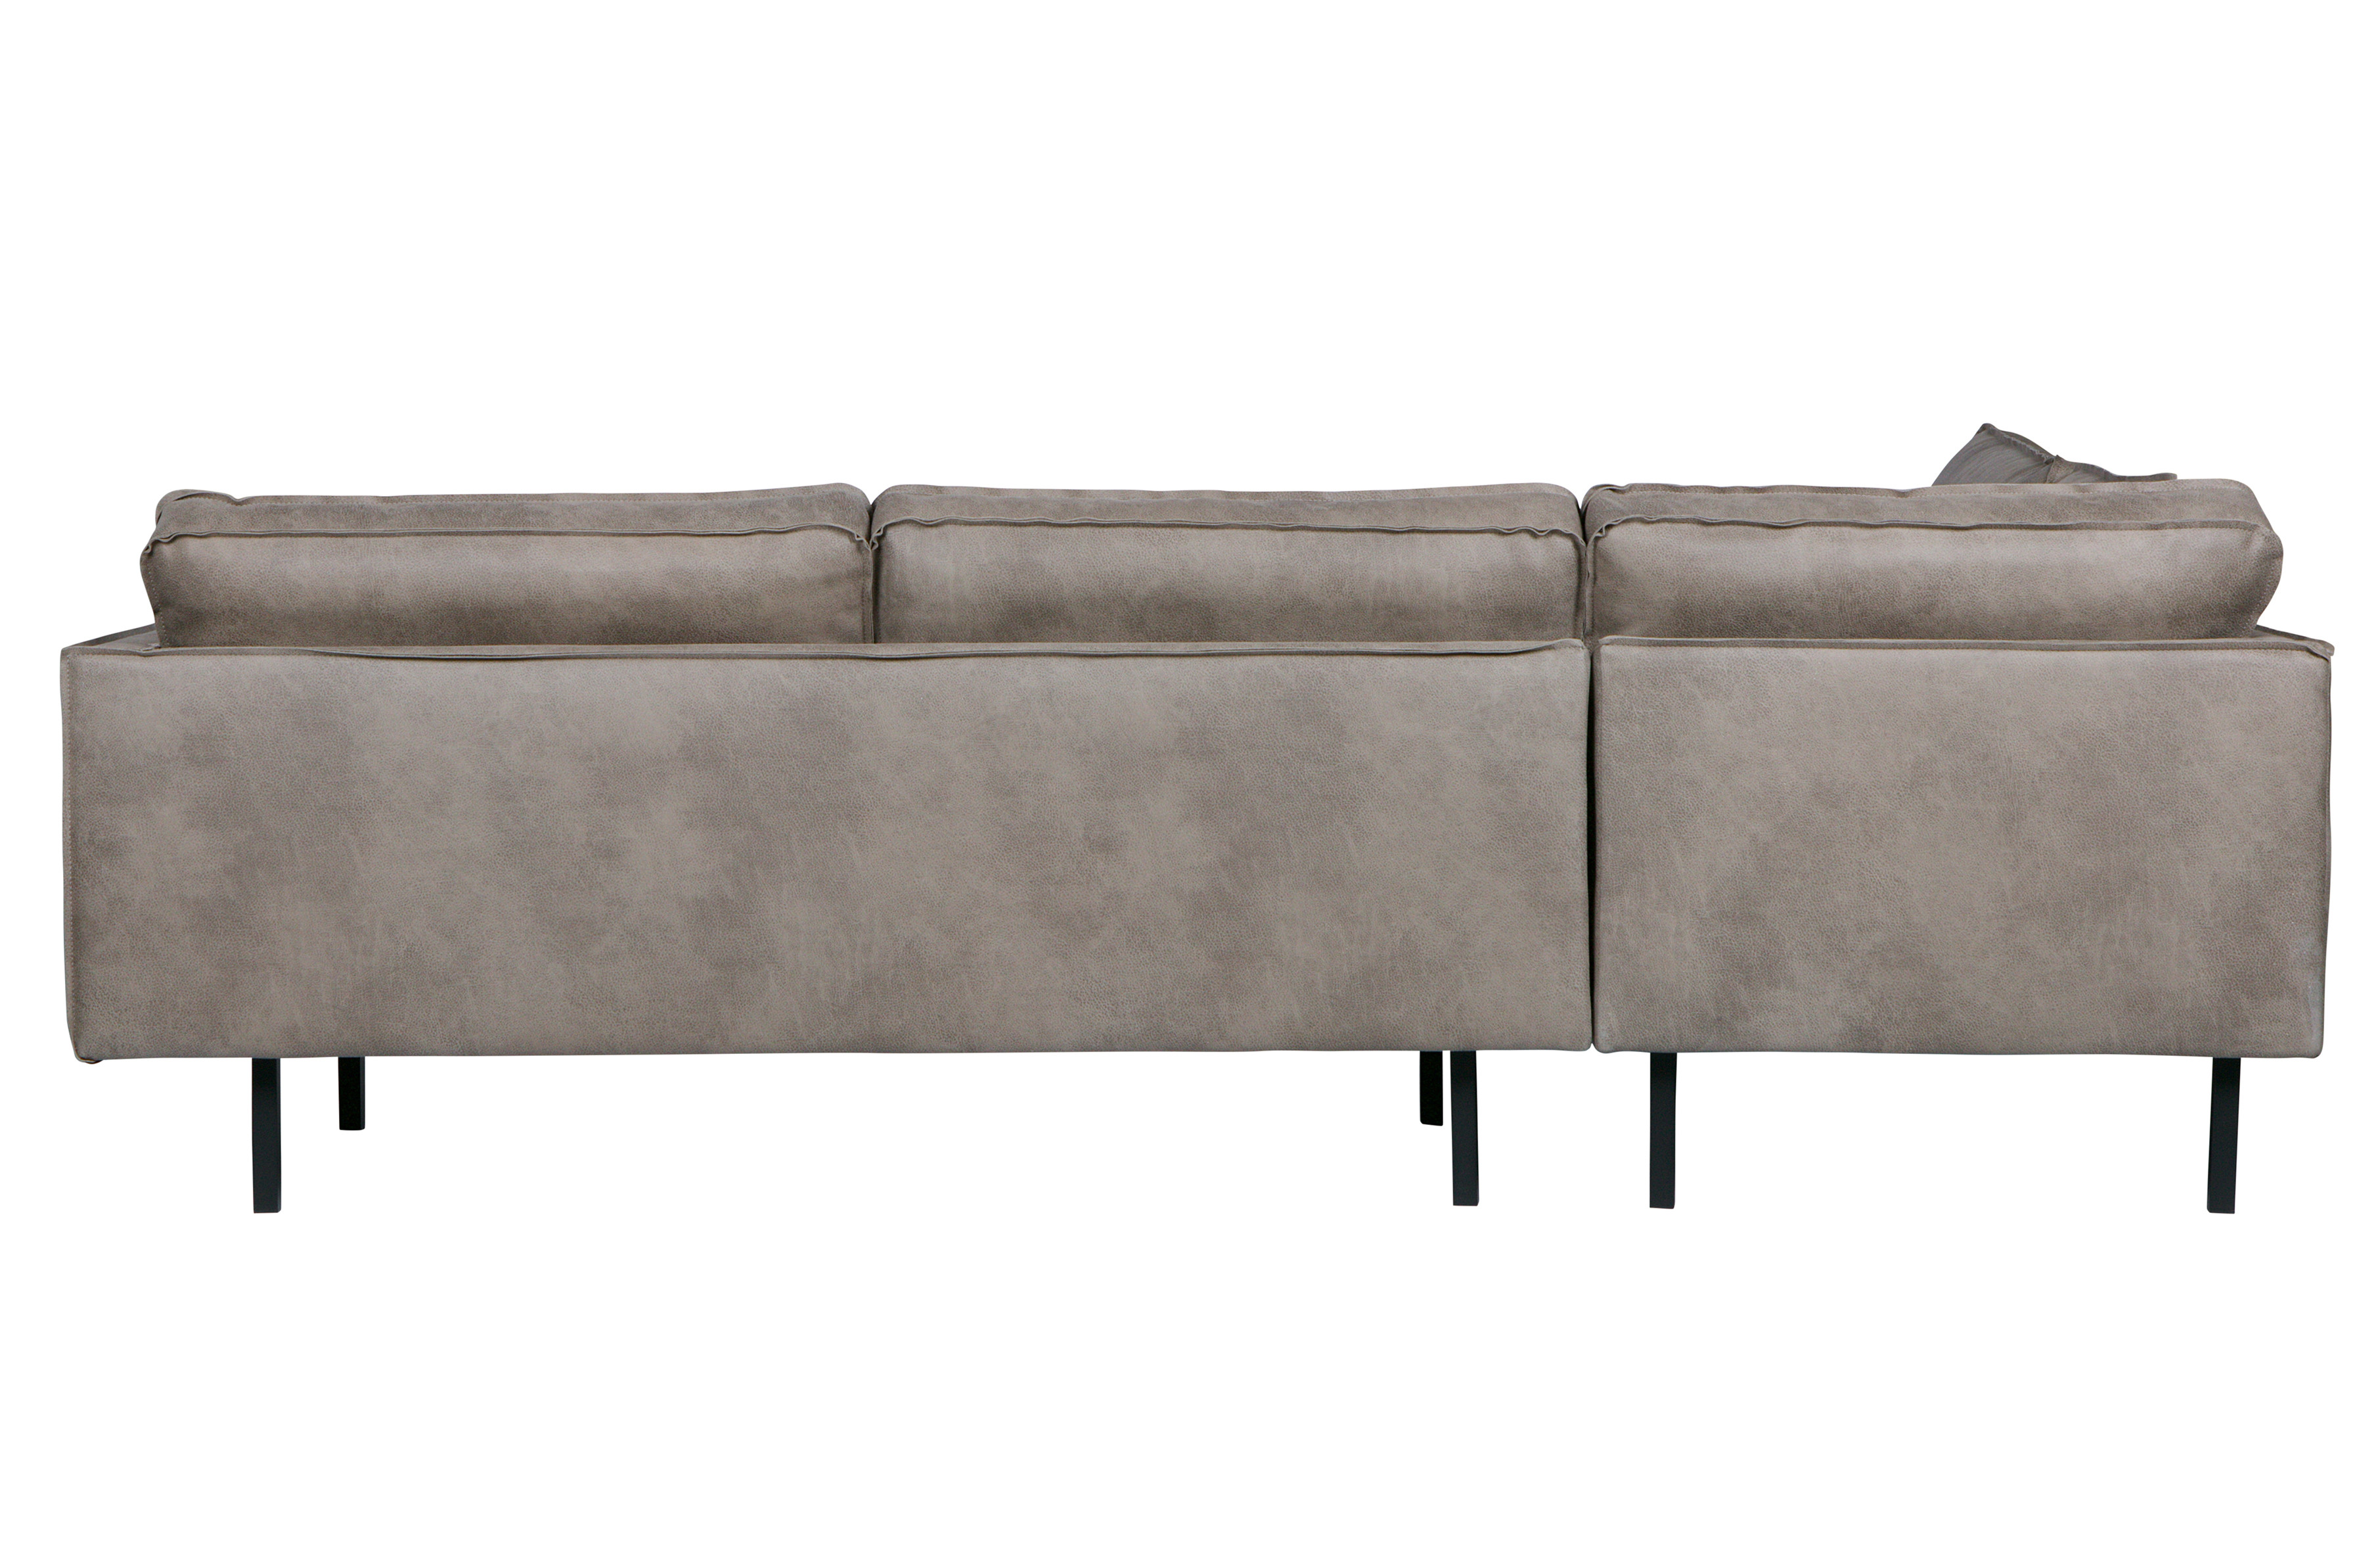 Rent a Sofa chaise longue Rodeo left elephant skin? Rent at KeyPro furniture rental!